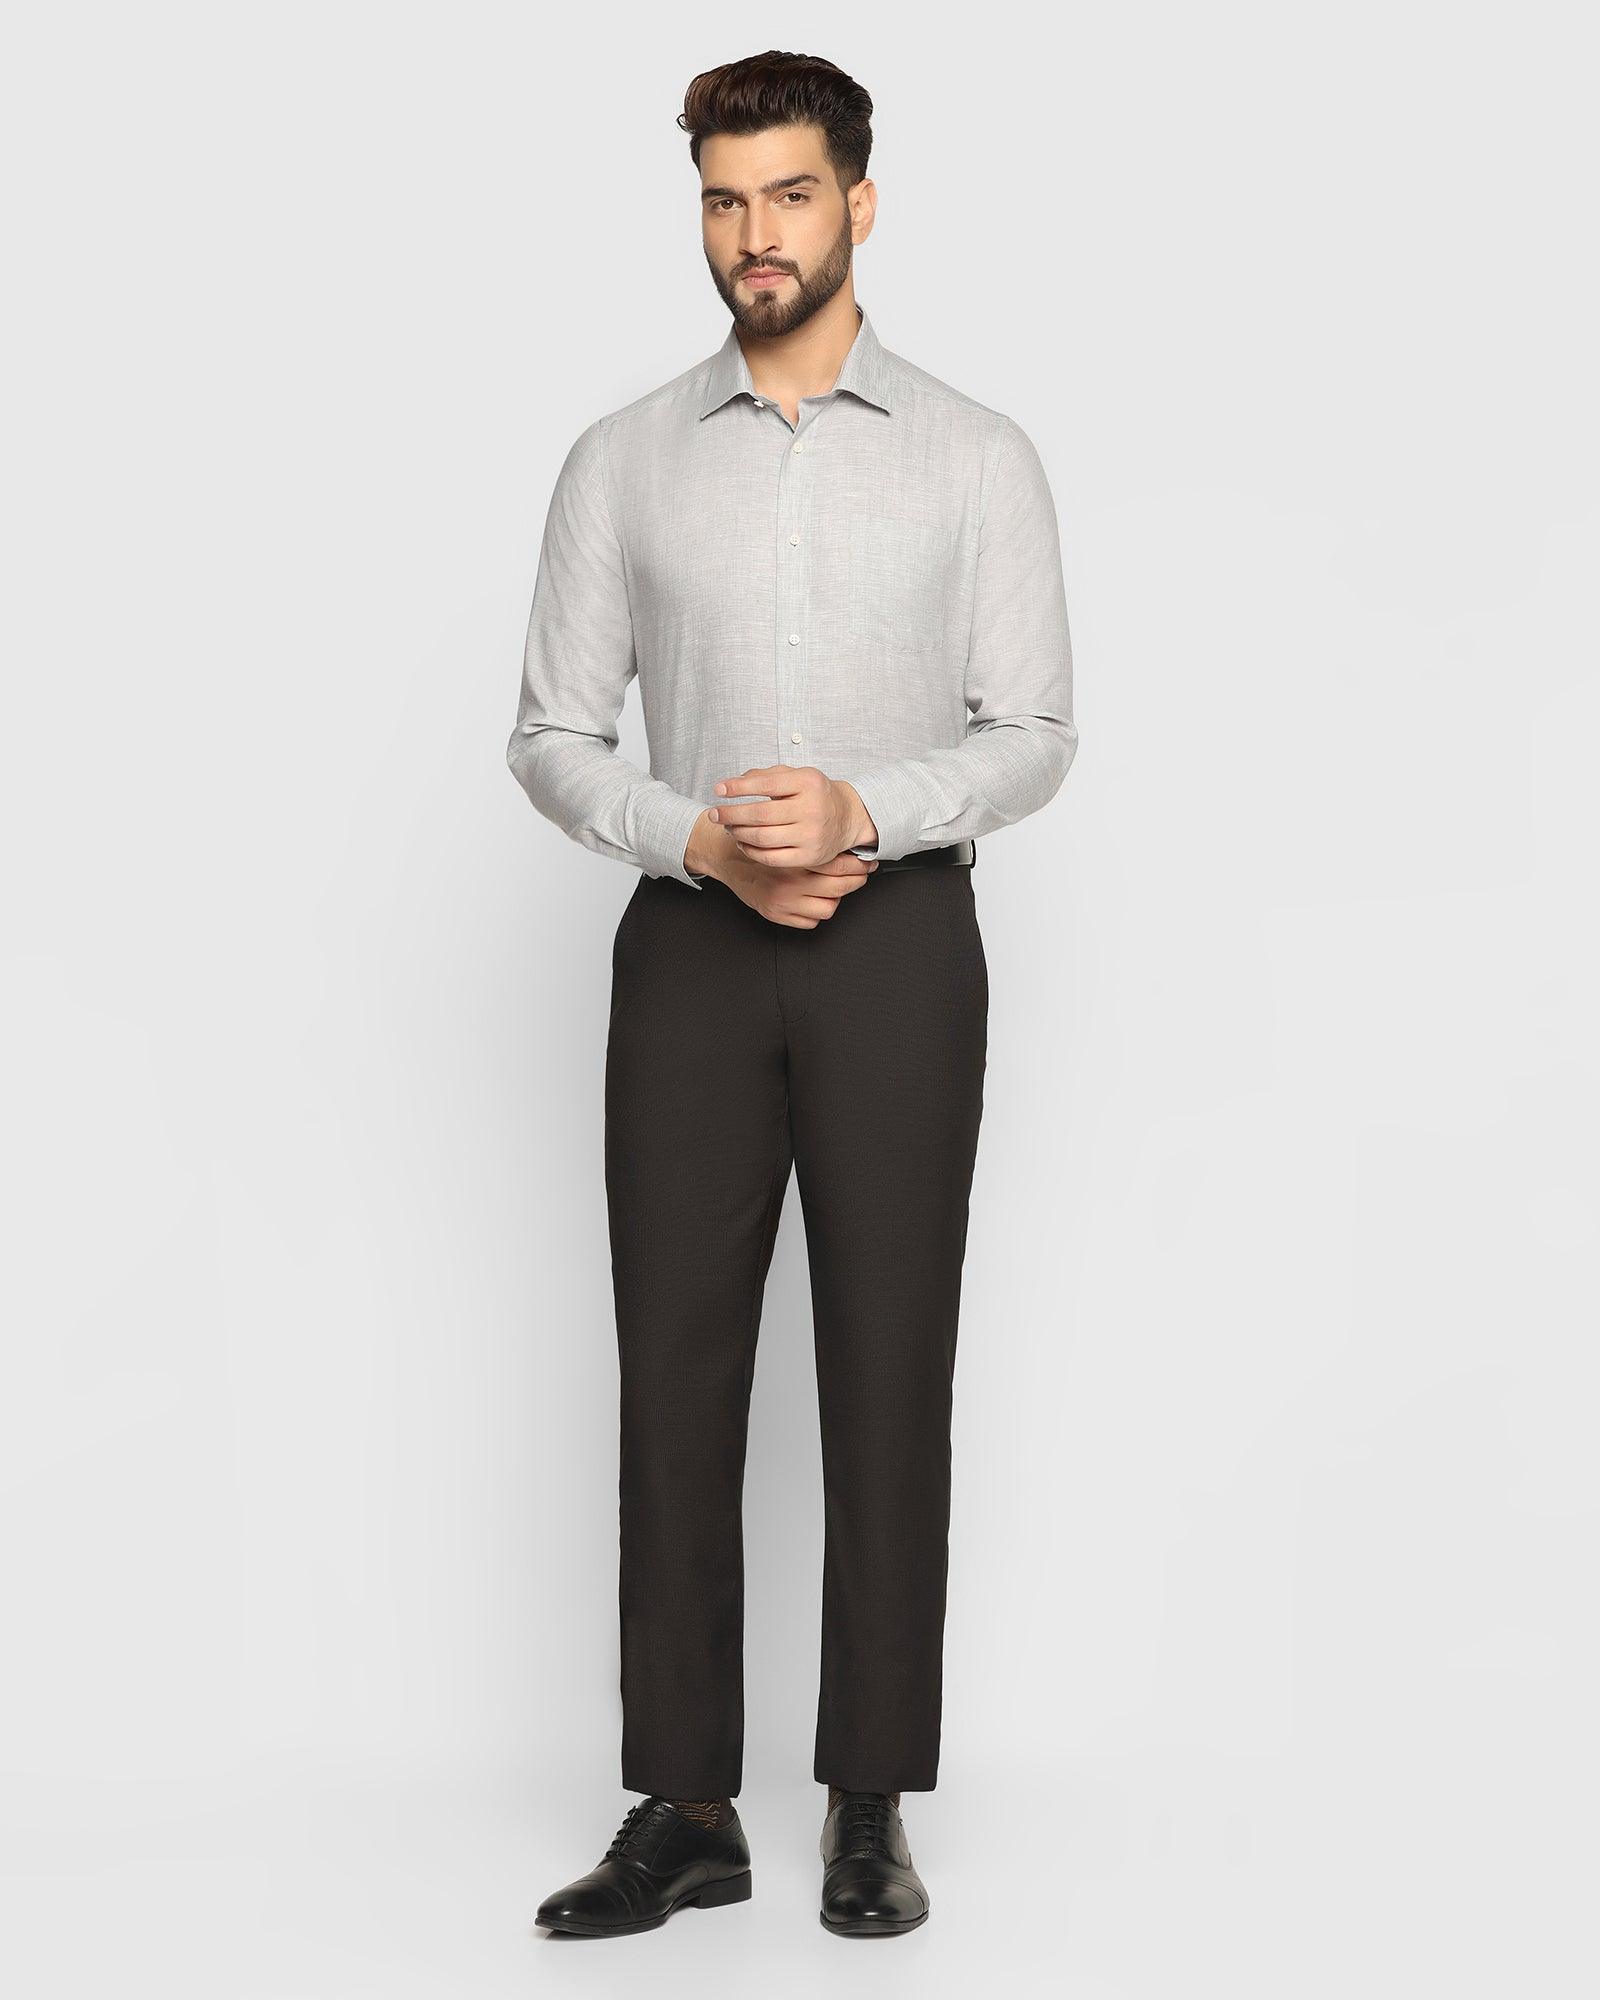 LOUIS PHILIPPE Men Striped Formal Grey Shirt - Buy LOUIS PHILIPPE Men  Striped Formal Grey Shirt Online at Best Prices in India | Flipkart.com